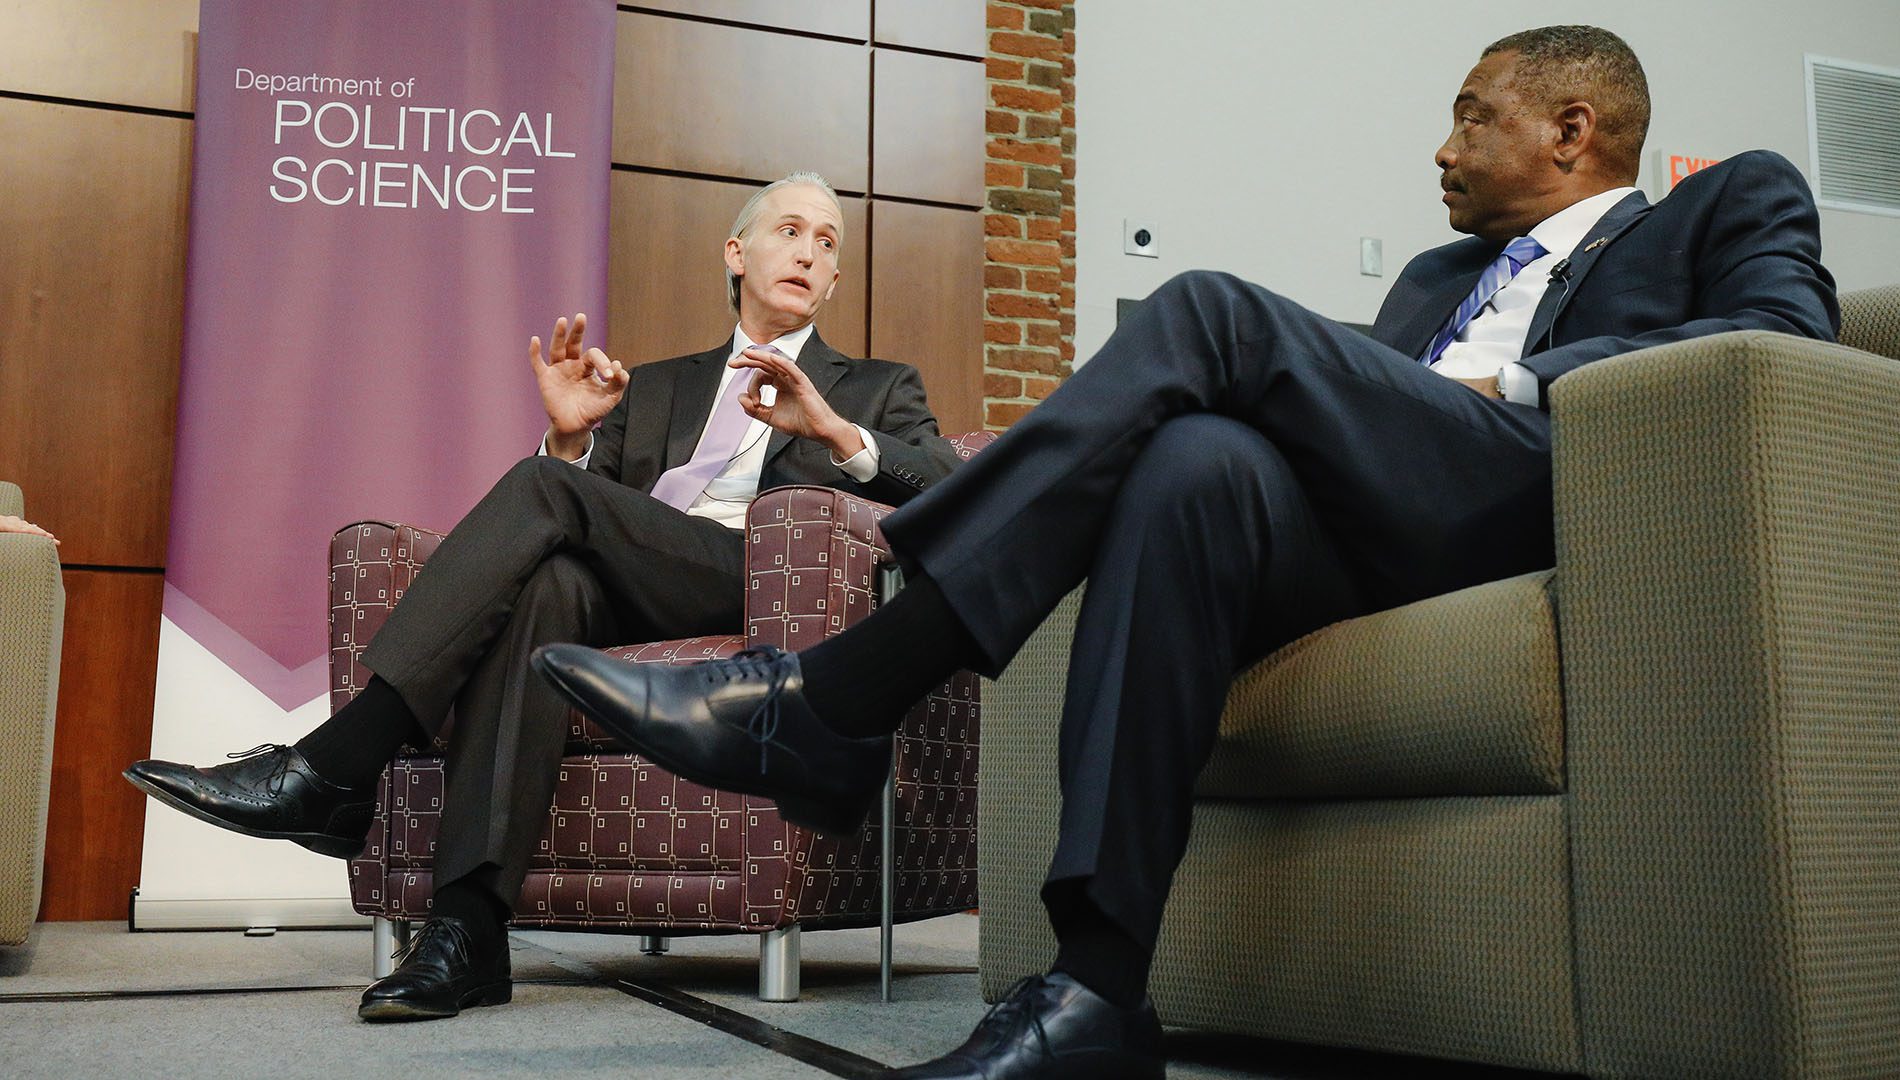 Rep. Trey Gowdy and Democratic candidate Thomas Dixon